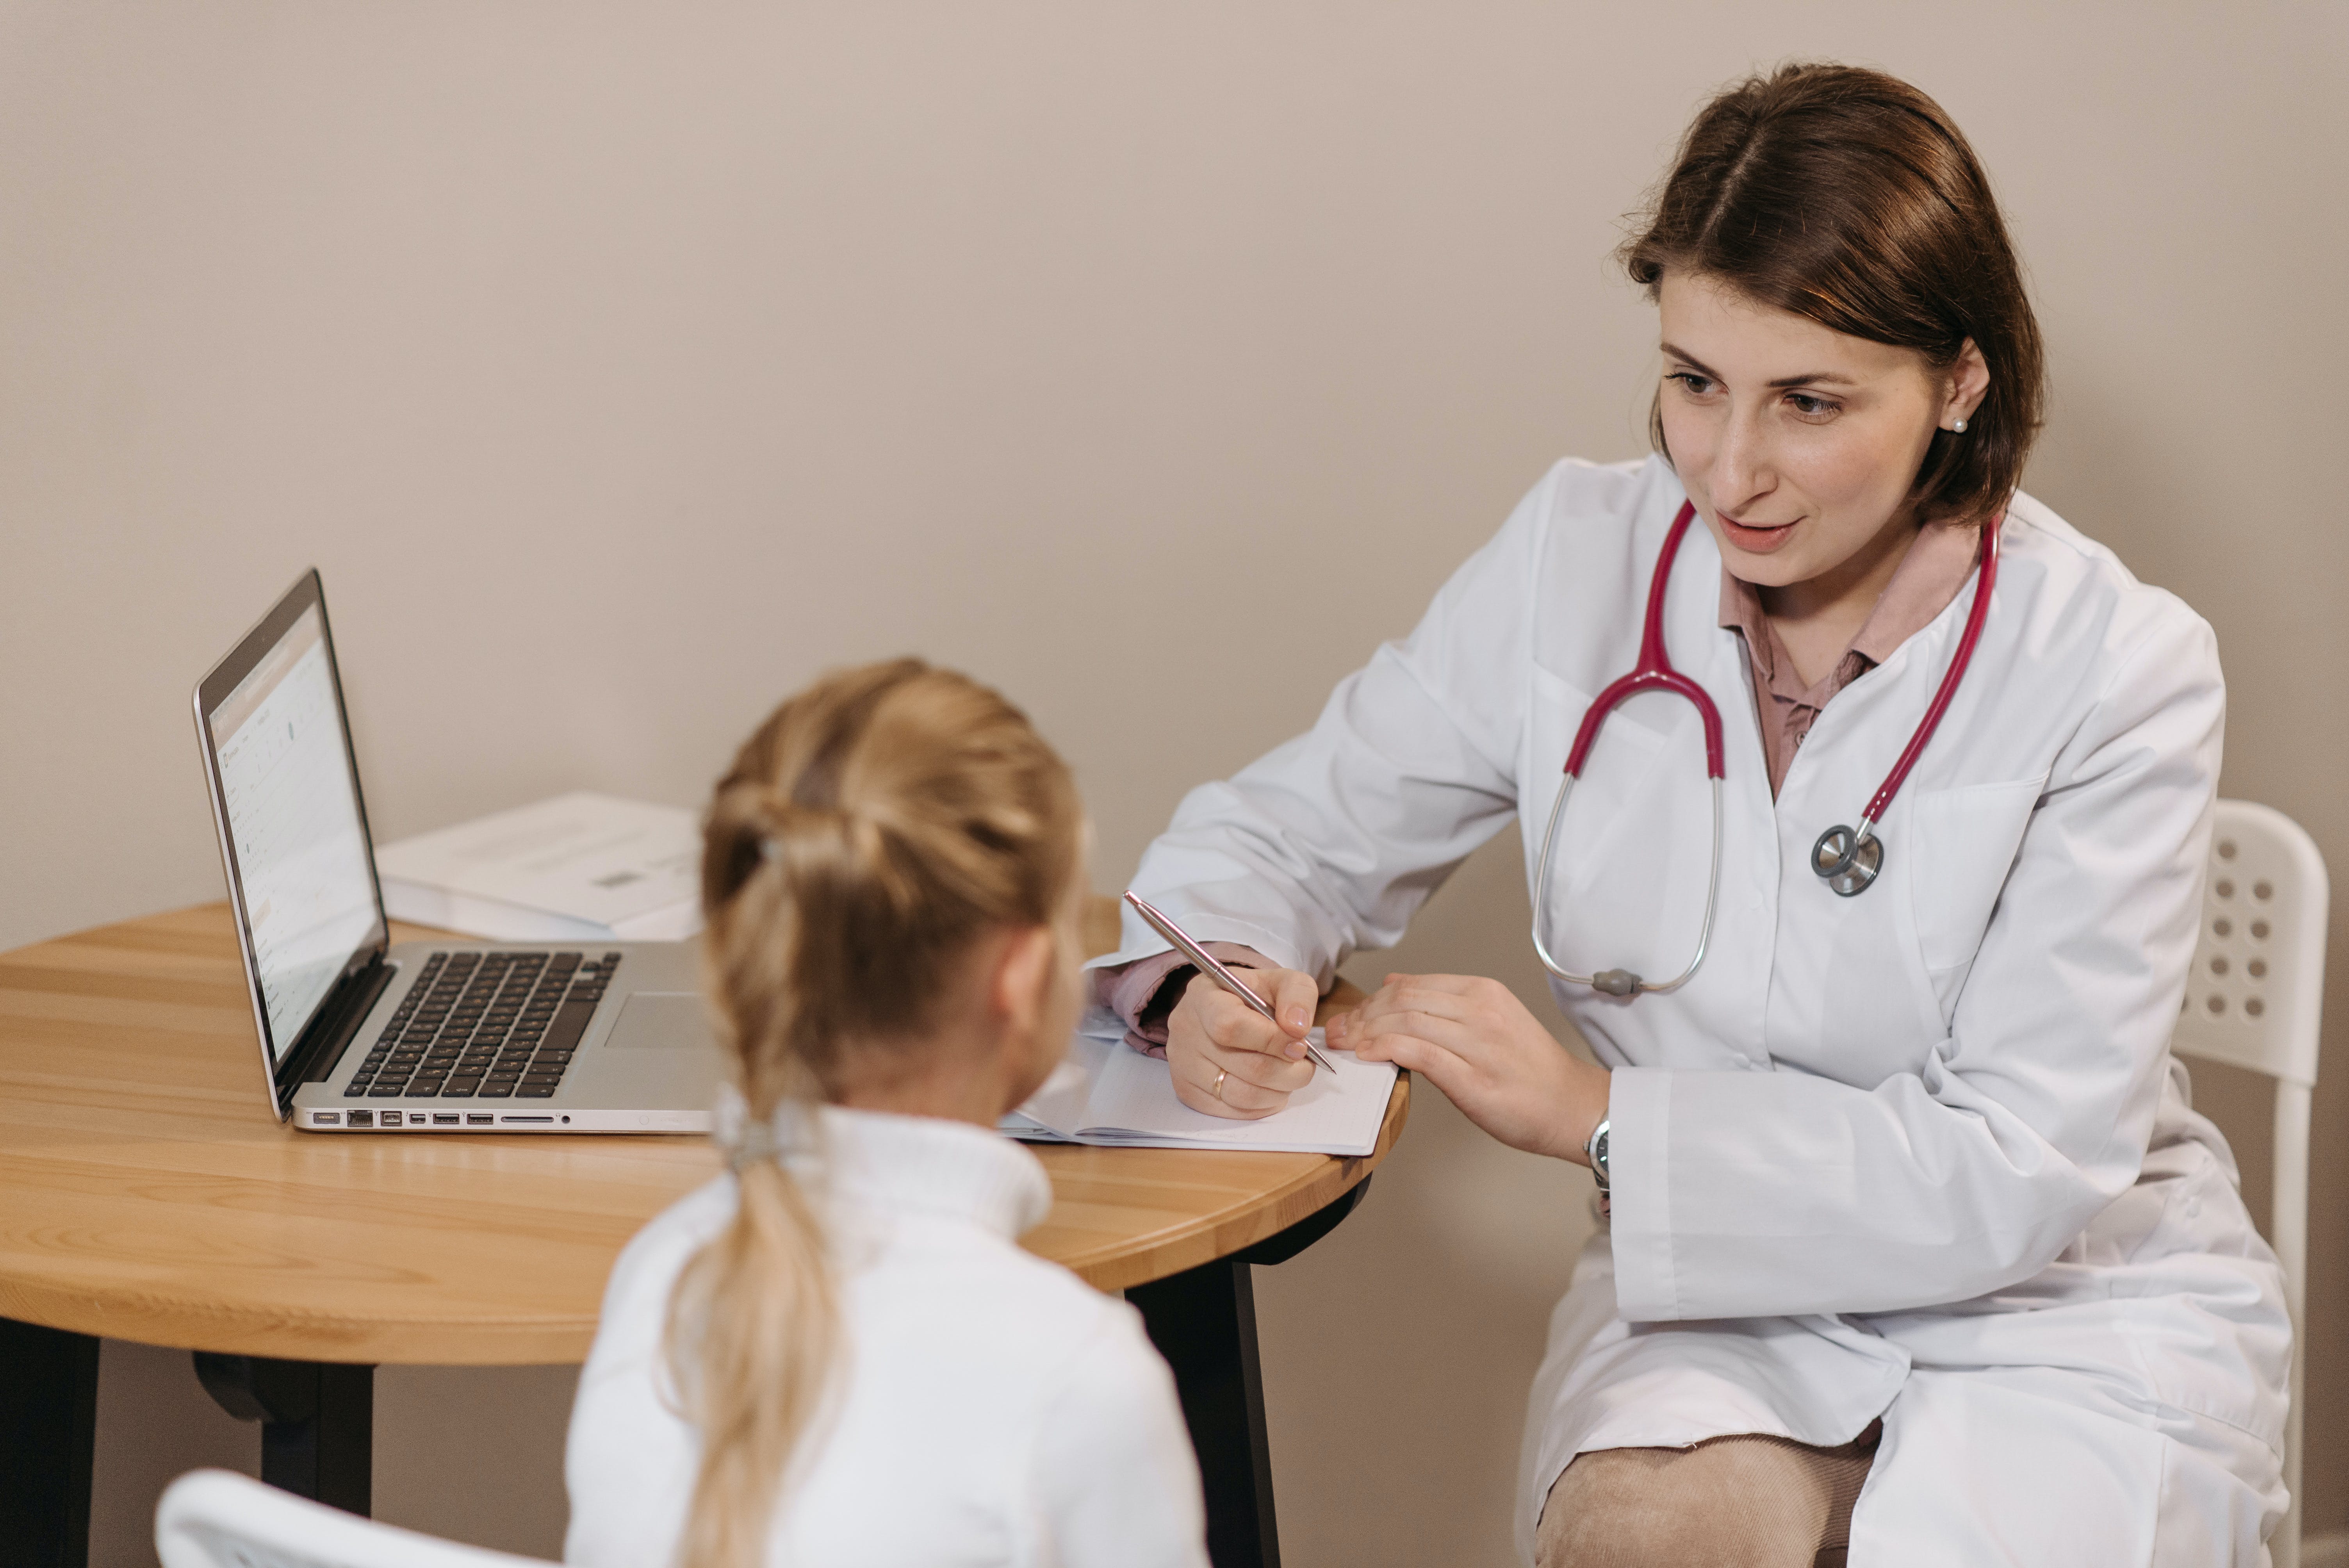 A doctor listening to a little girl while taking notes. | Source: Pexels